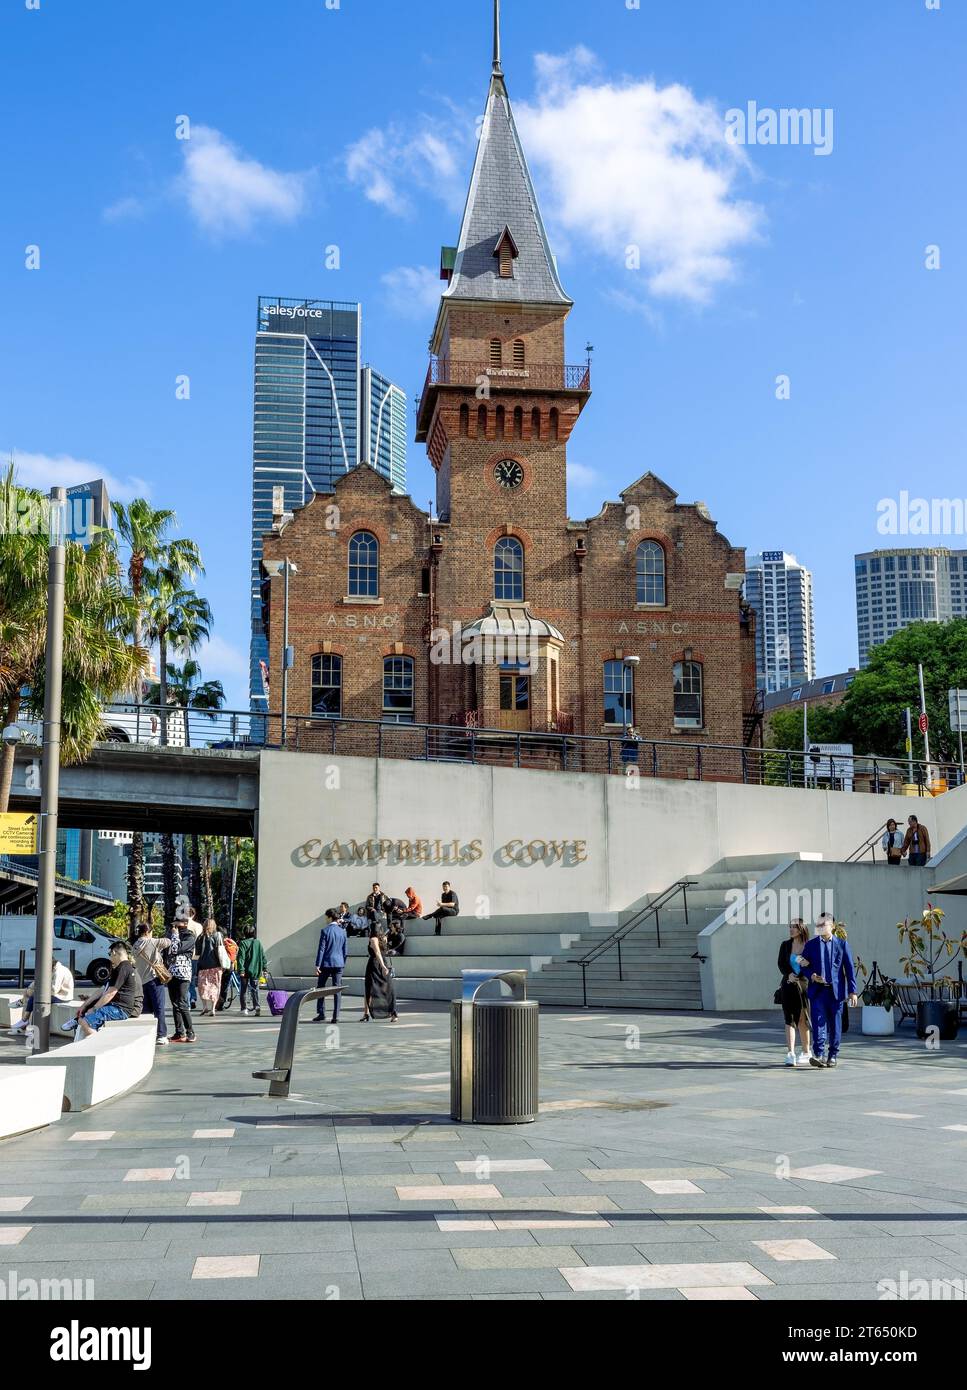 Campbells Cove is for having a meal or for walking around from The Rocks to Circular Quay in Sydney, NSW, Australia Stock Photo